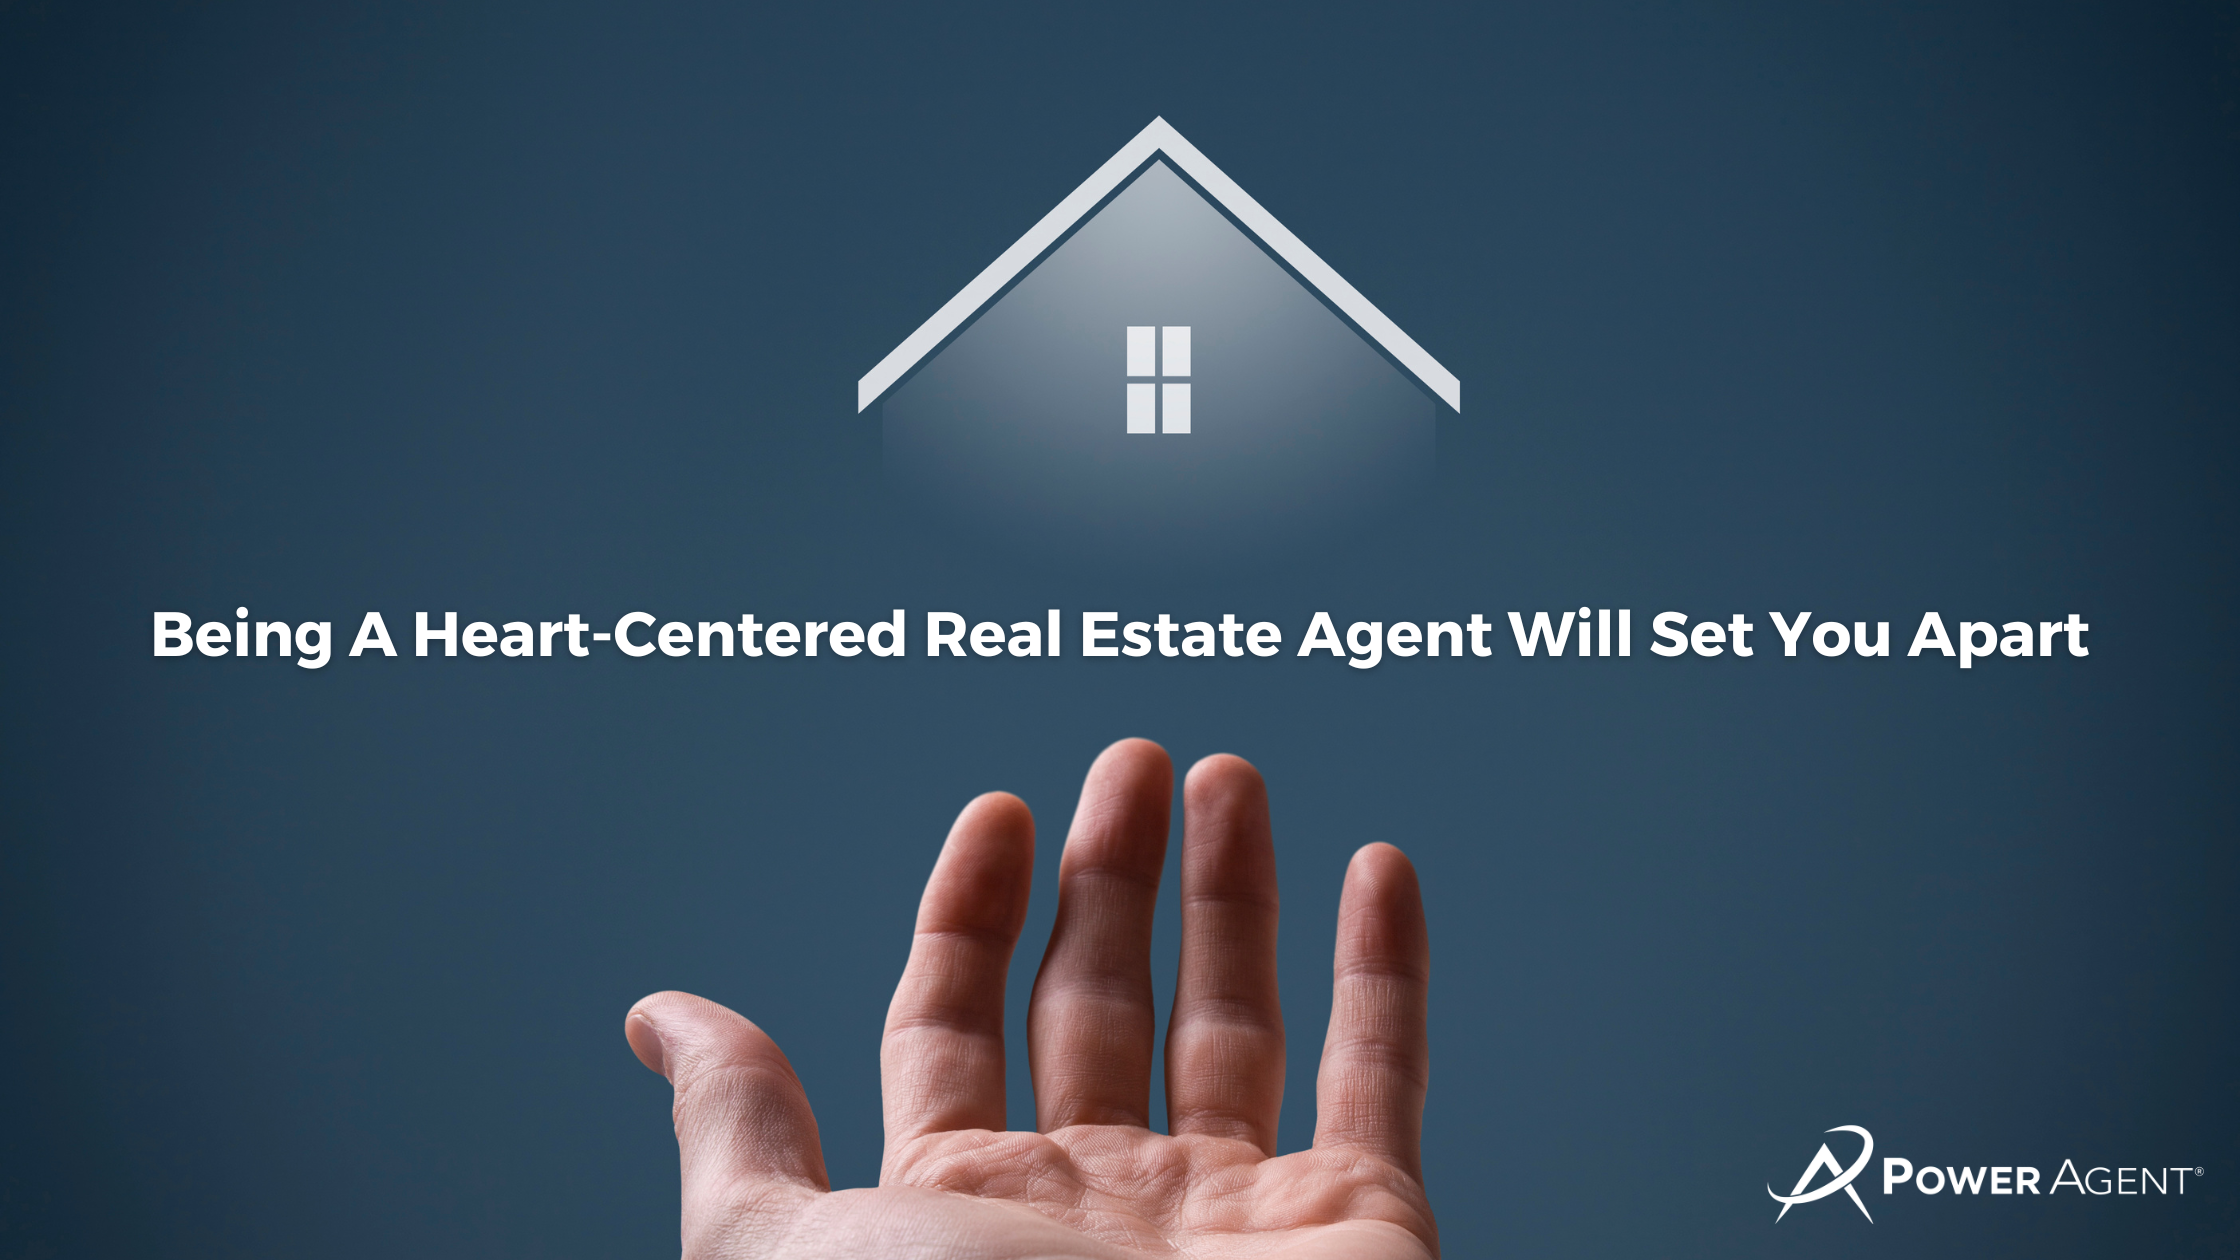 Being A Heart-Centered Real Estate Agent Will Set You Apart